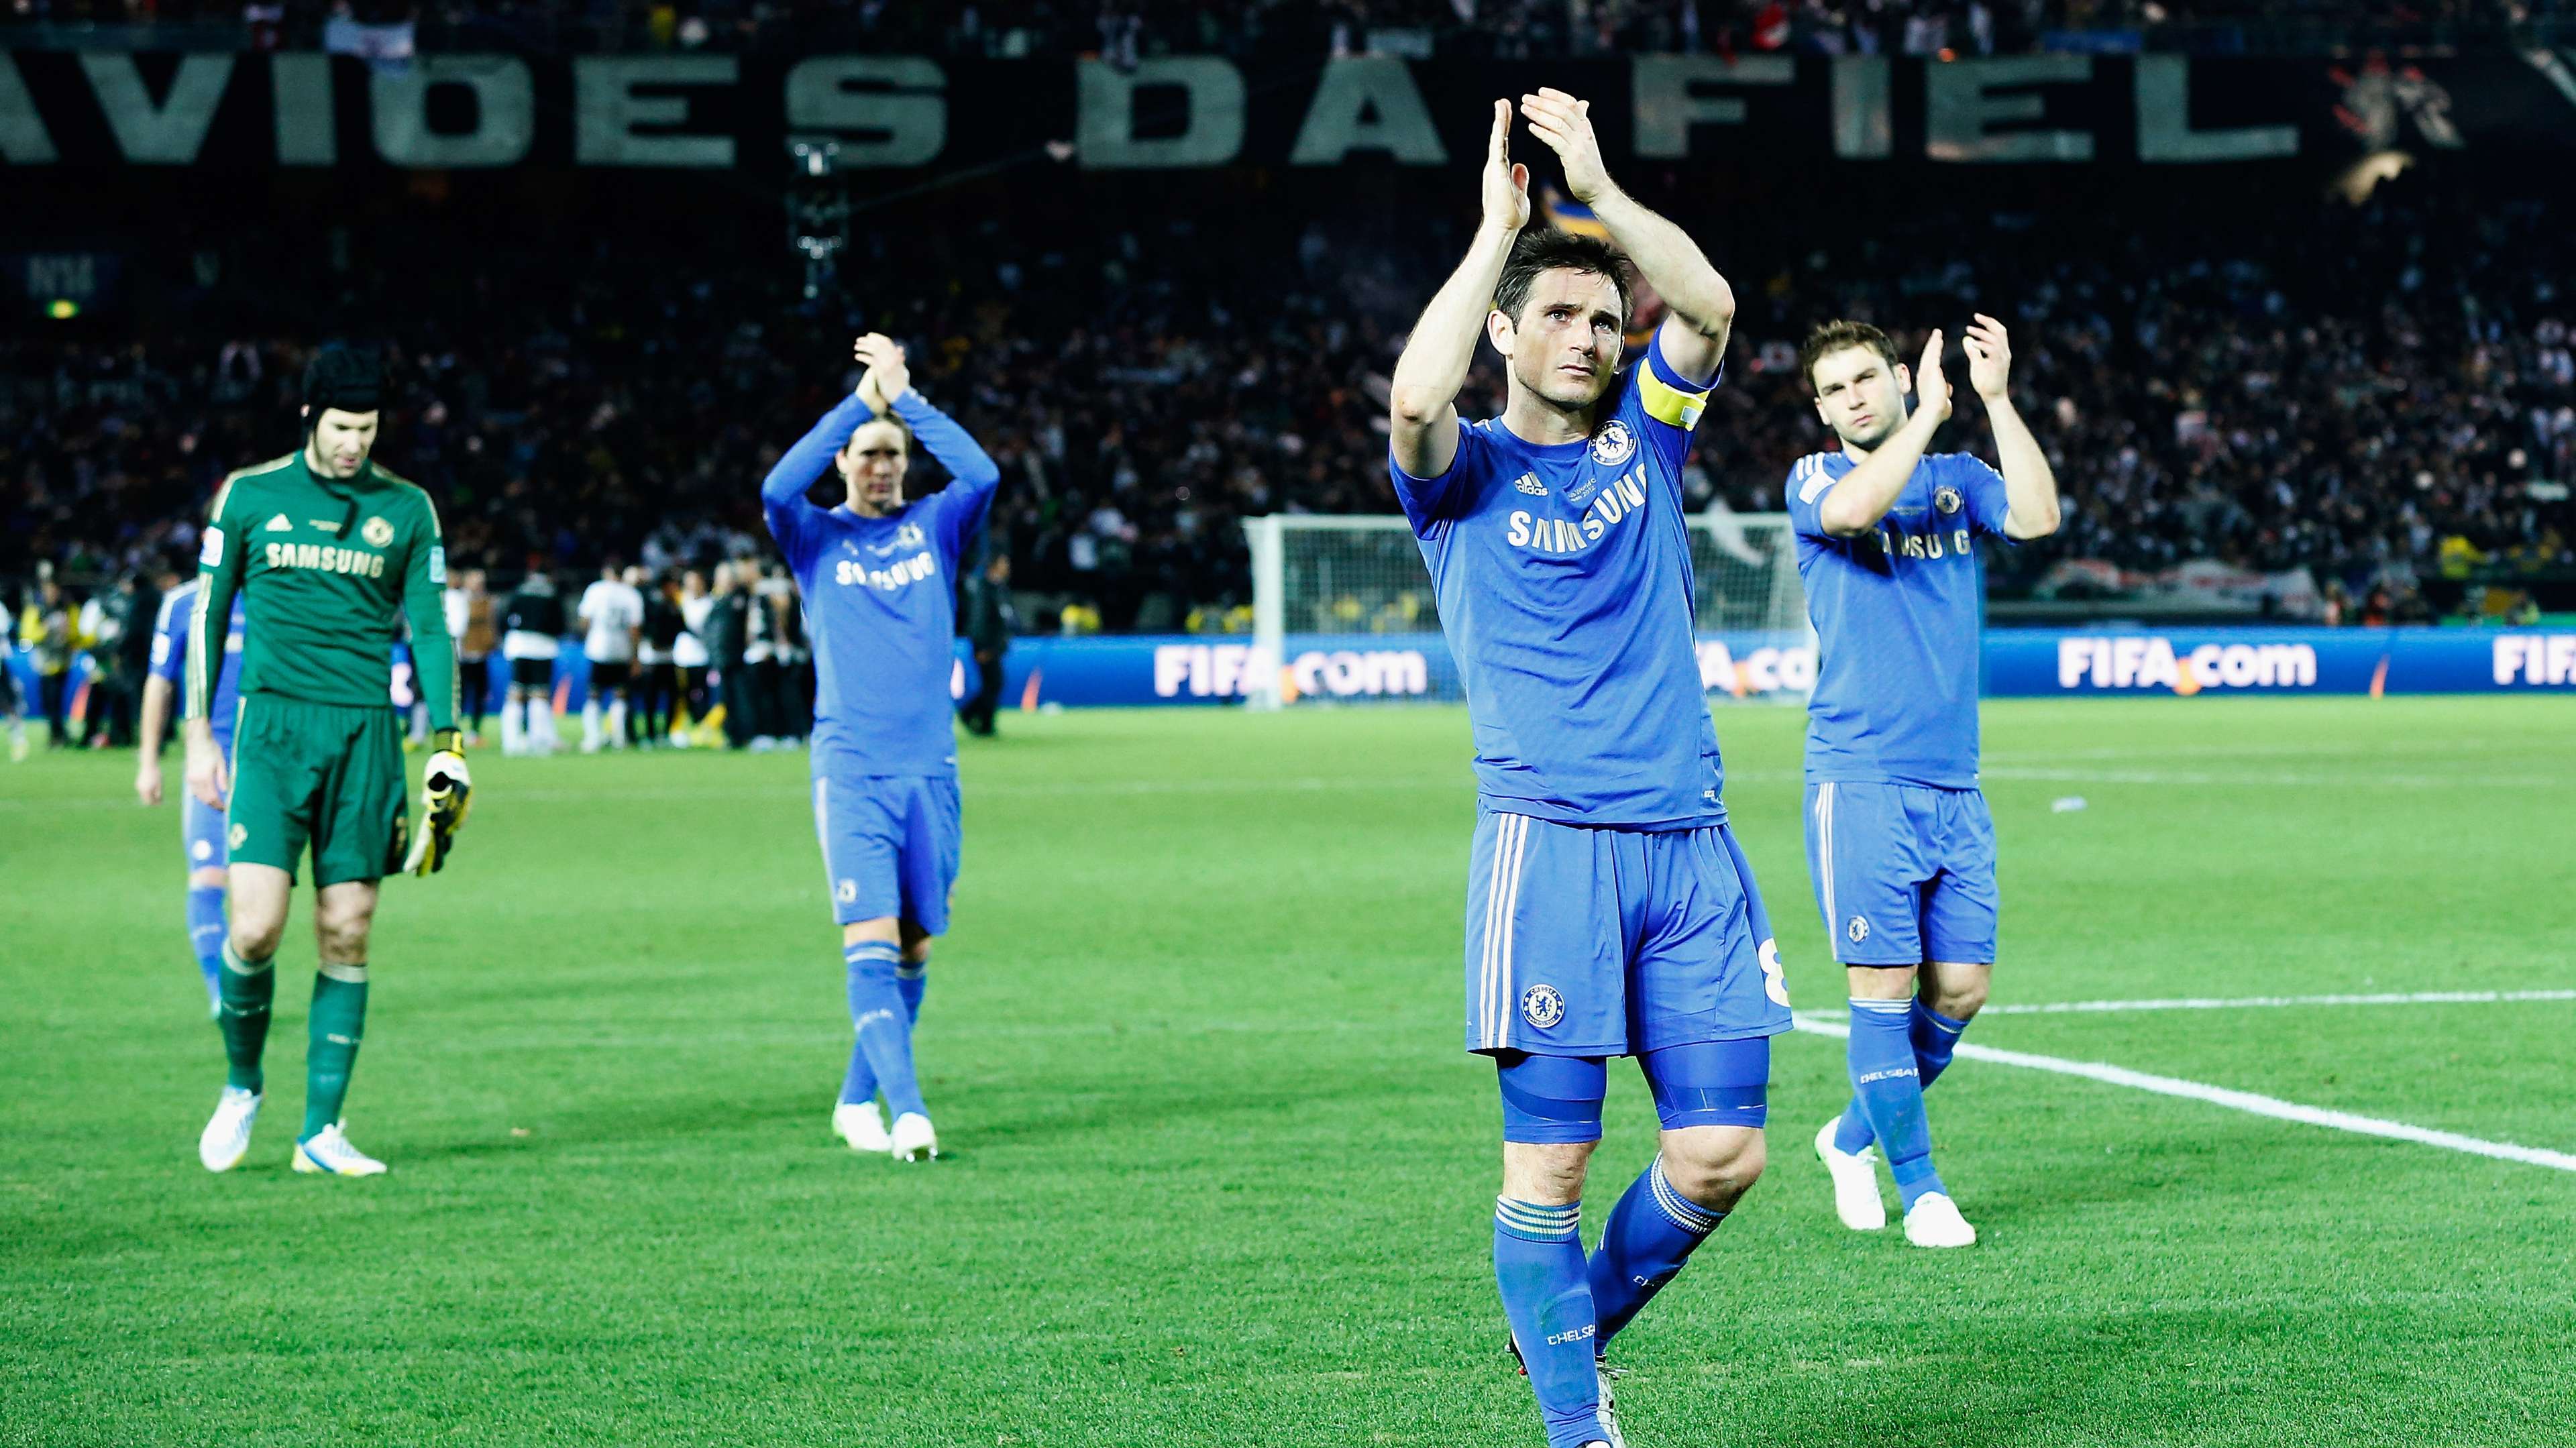 Chelsea Club World Cup Final 2012